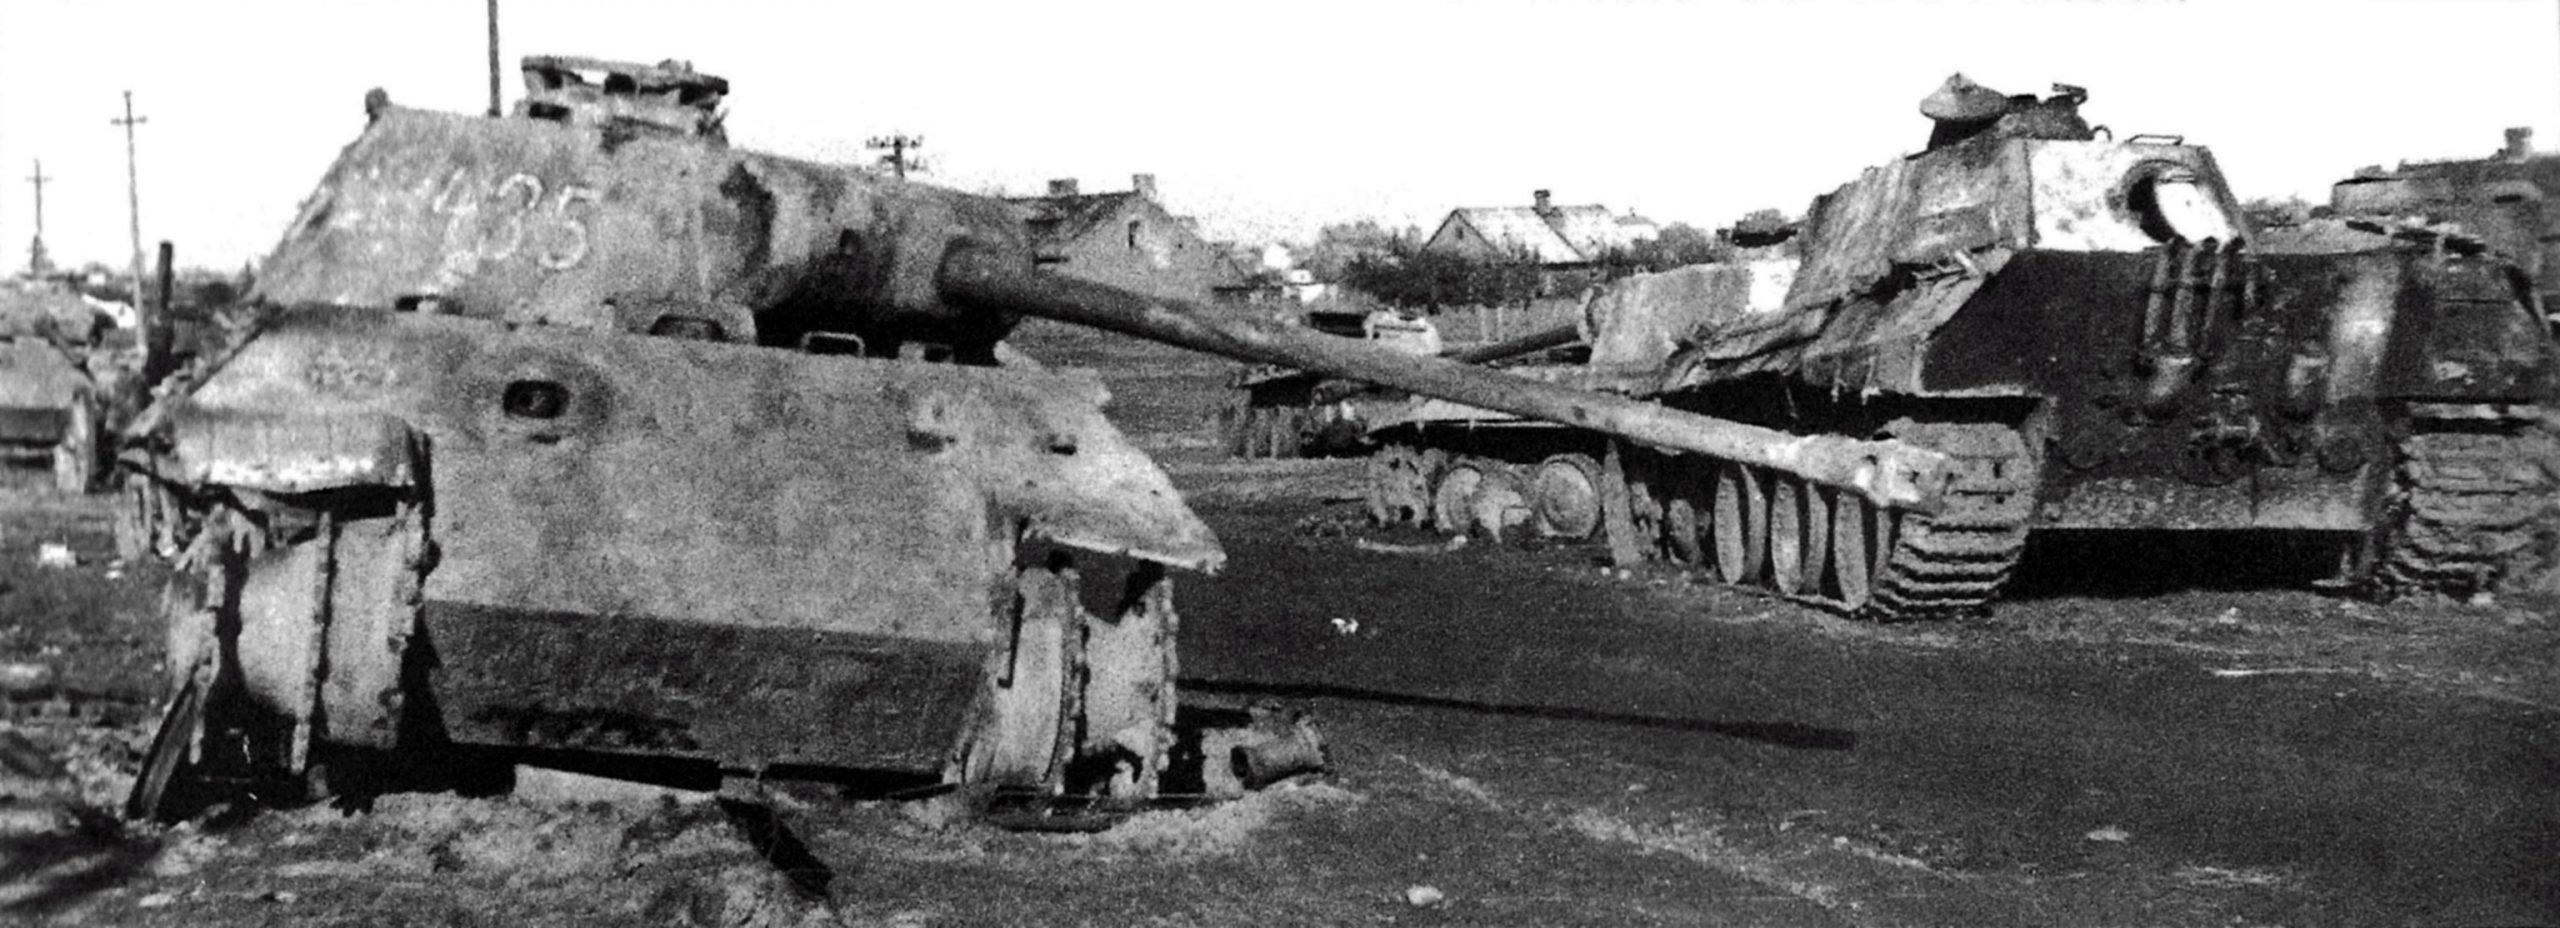 German Panther tanks from the SS Totenkopf division